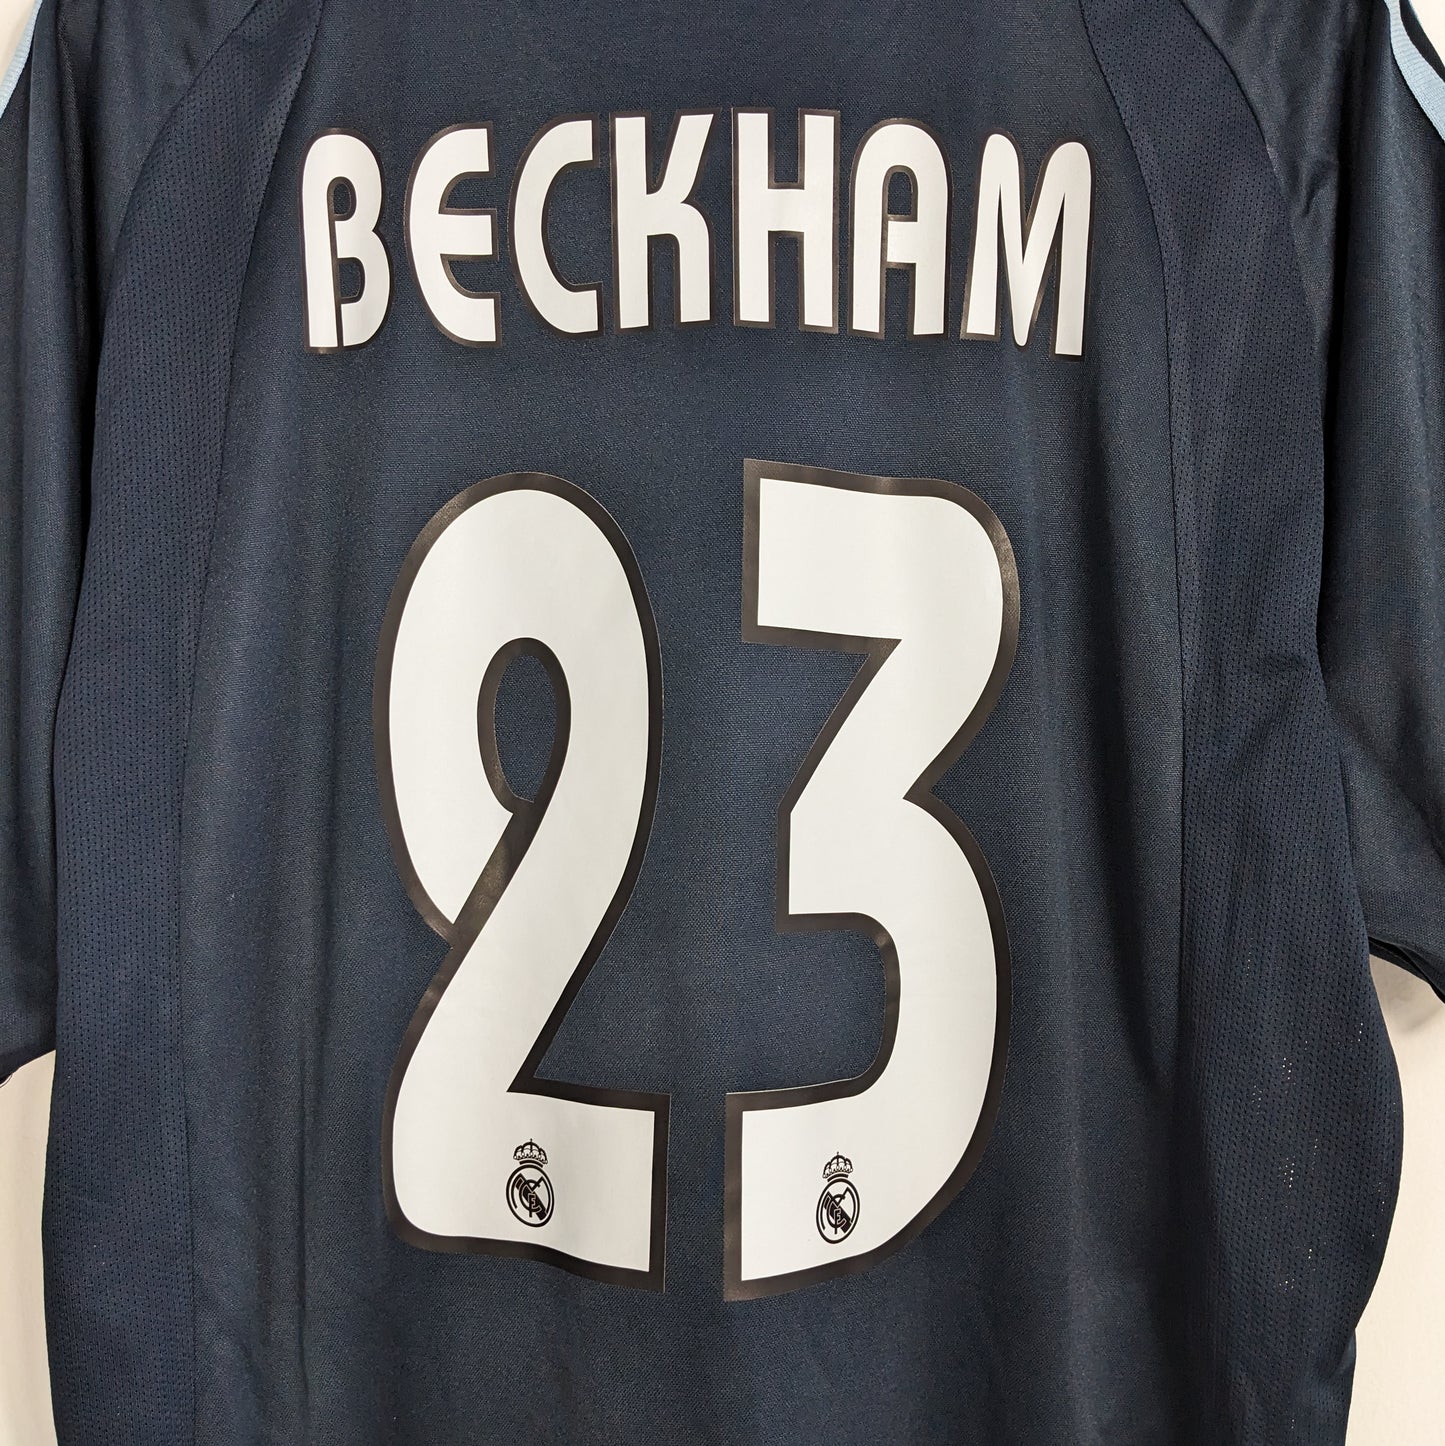 Authentic Real Madrid 2003/2004 - Beckham #23 Size L